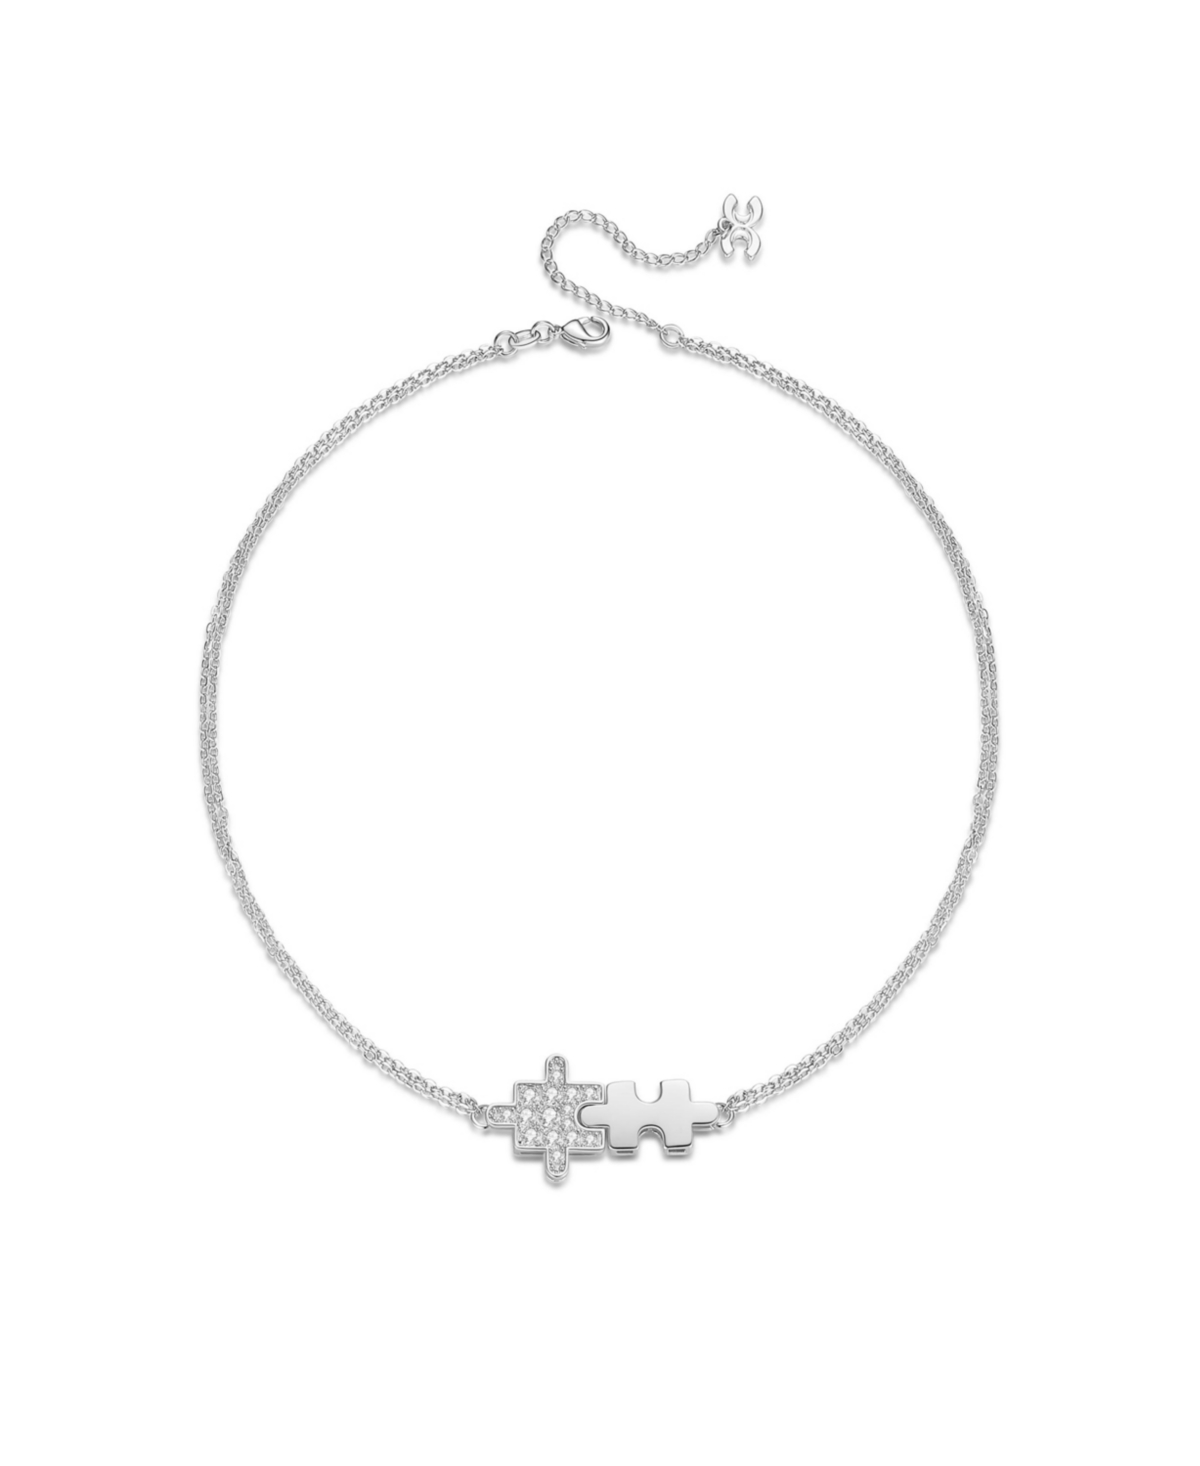 Jigsaw Puzzle Necklace - Silver